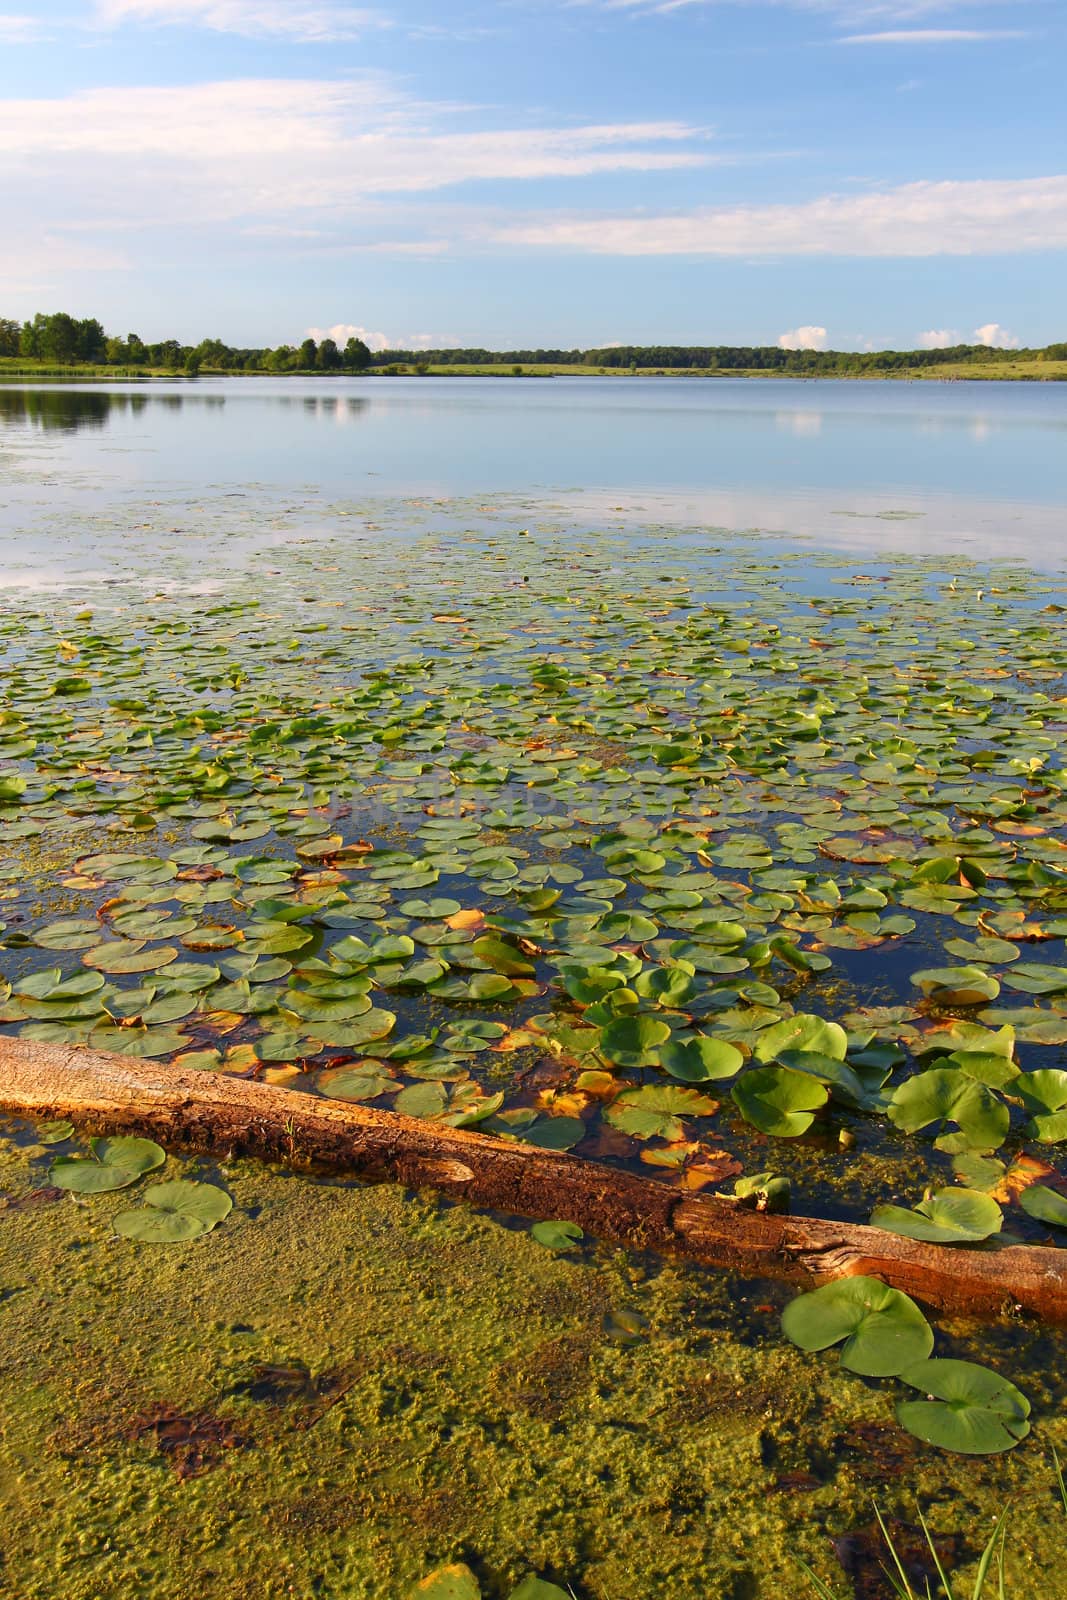 Lily pads along the shoreline of Shabbona Lake in northern Illinois.